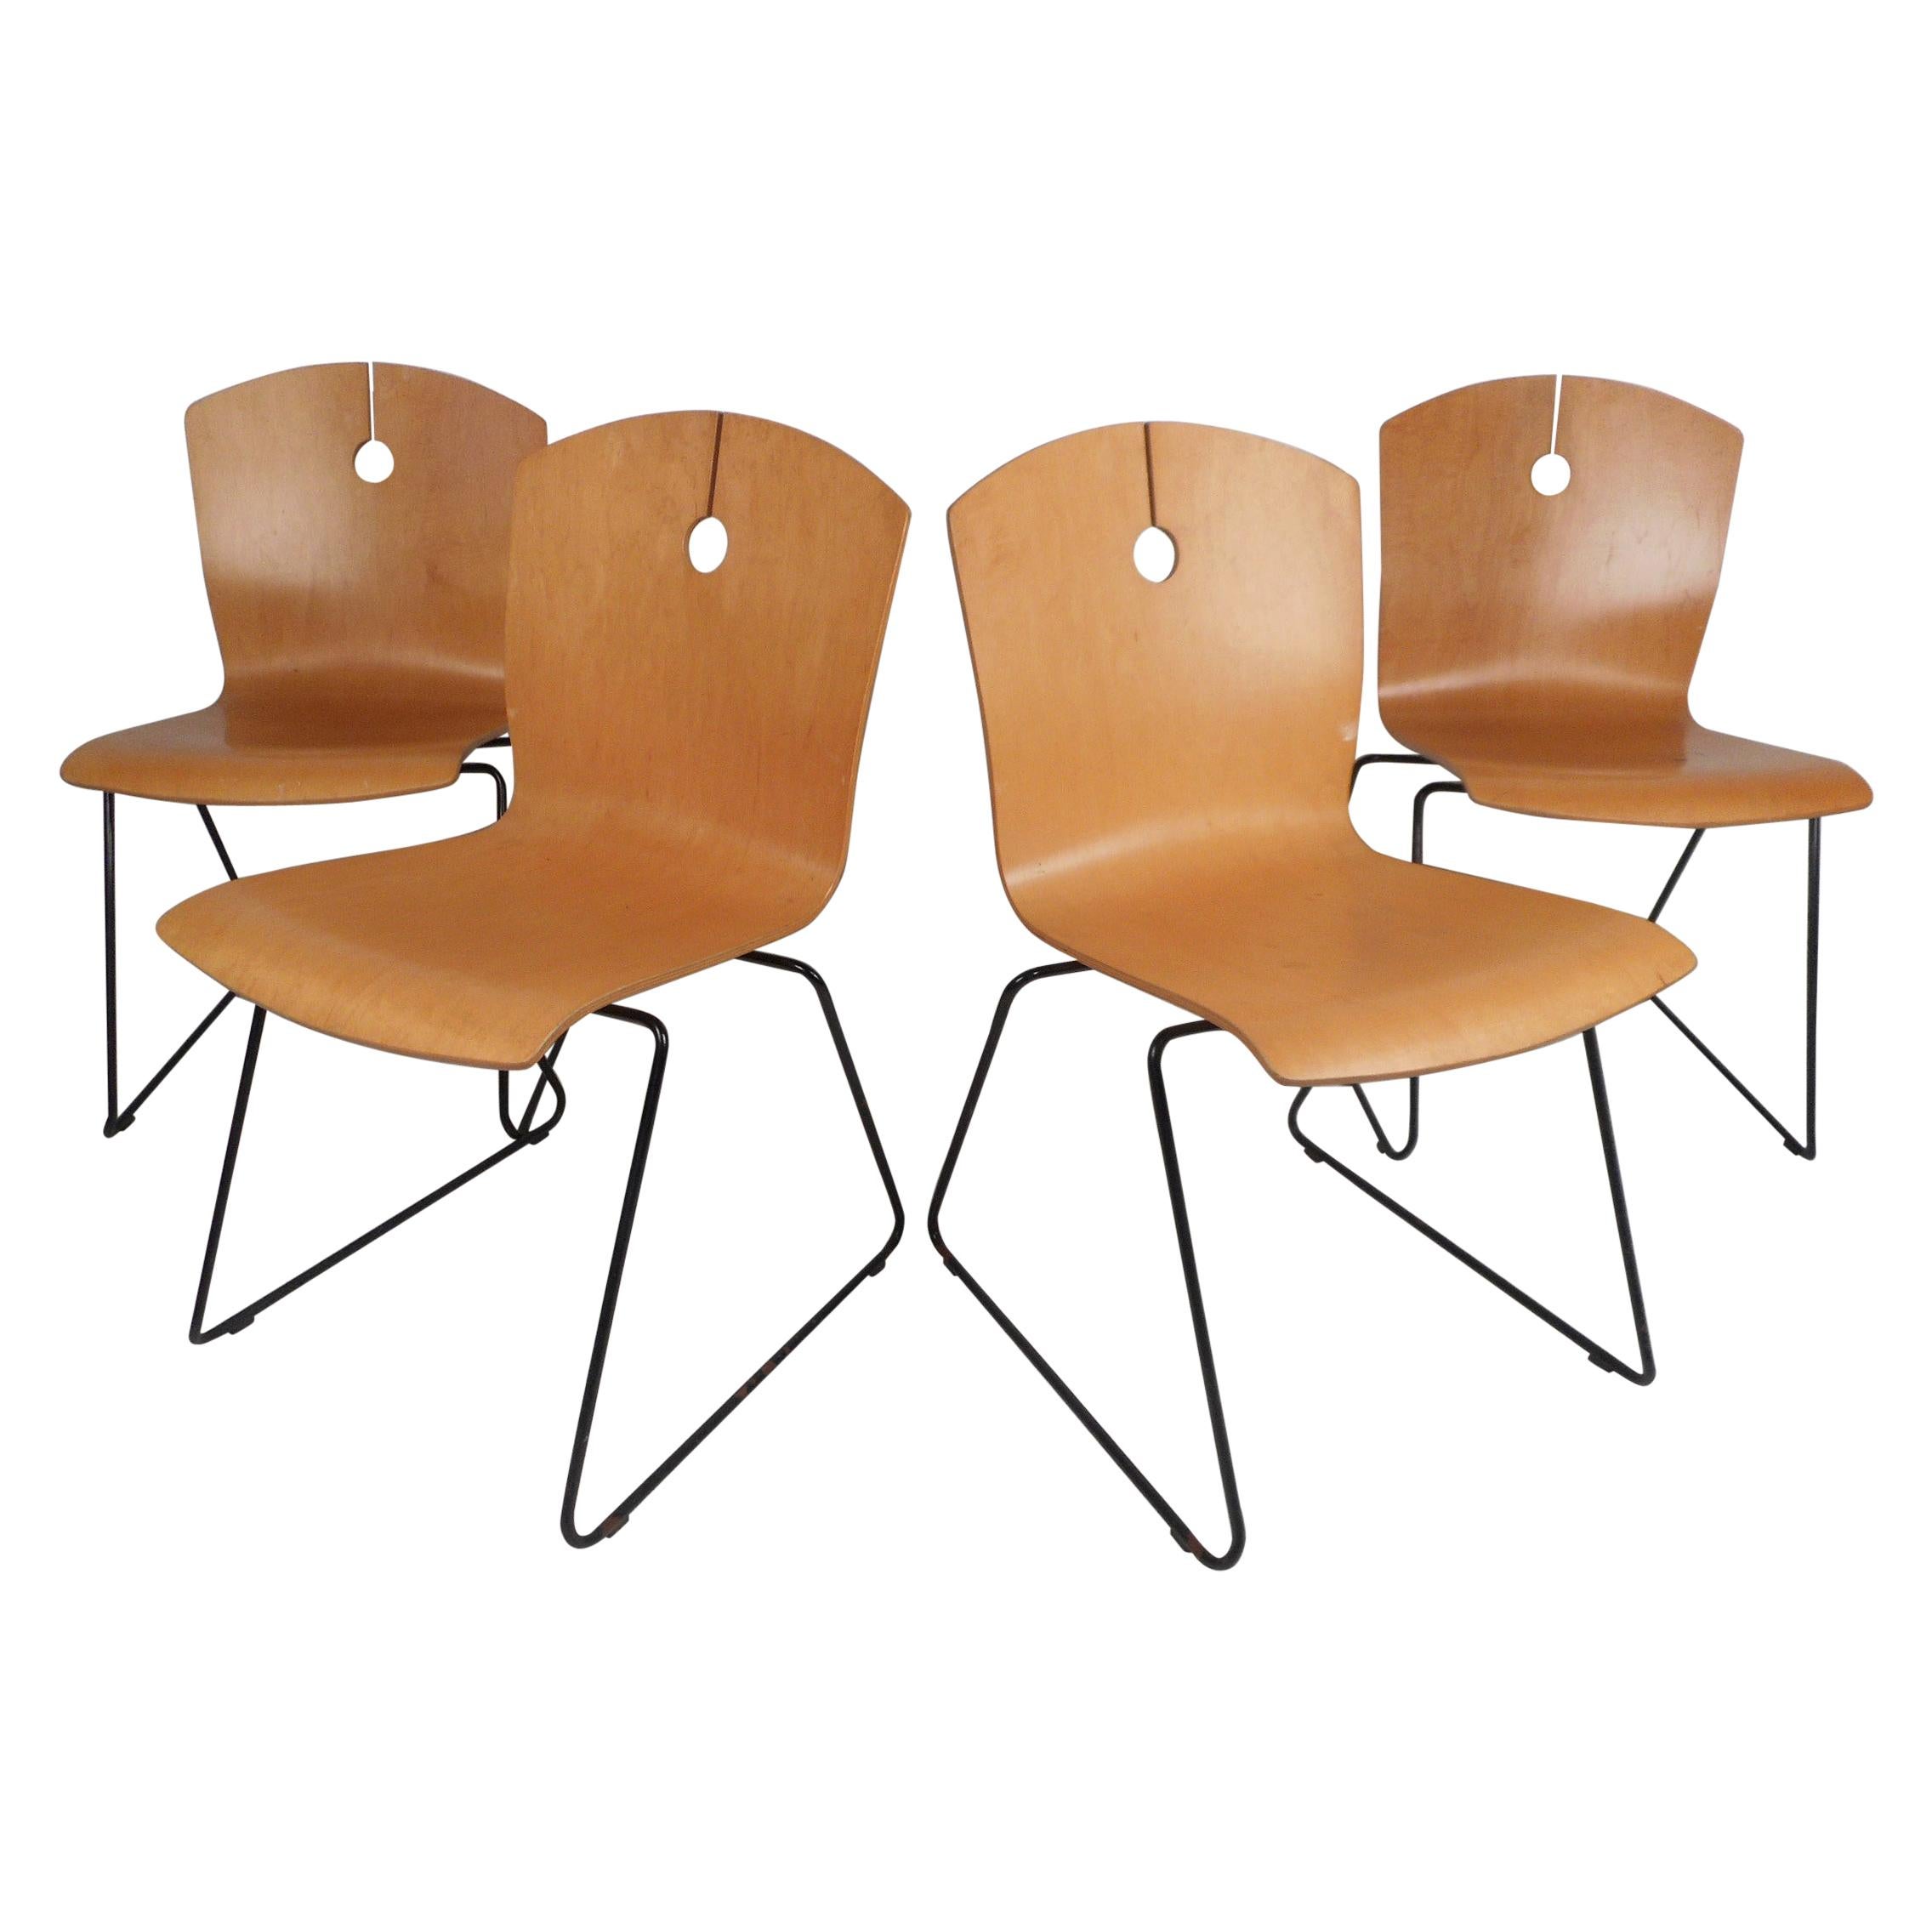 Modern Bentwood Stacking Chairs by Wieland, Set of 4